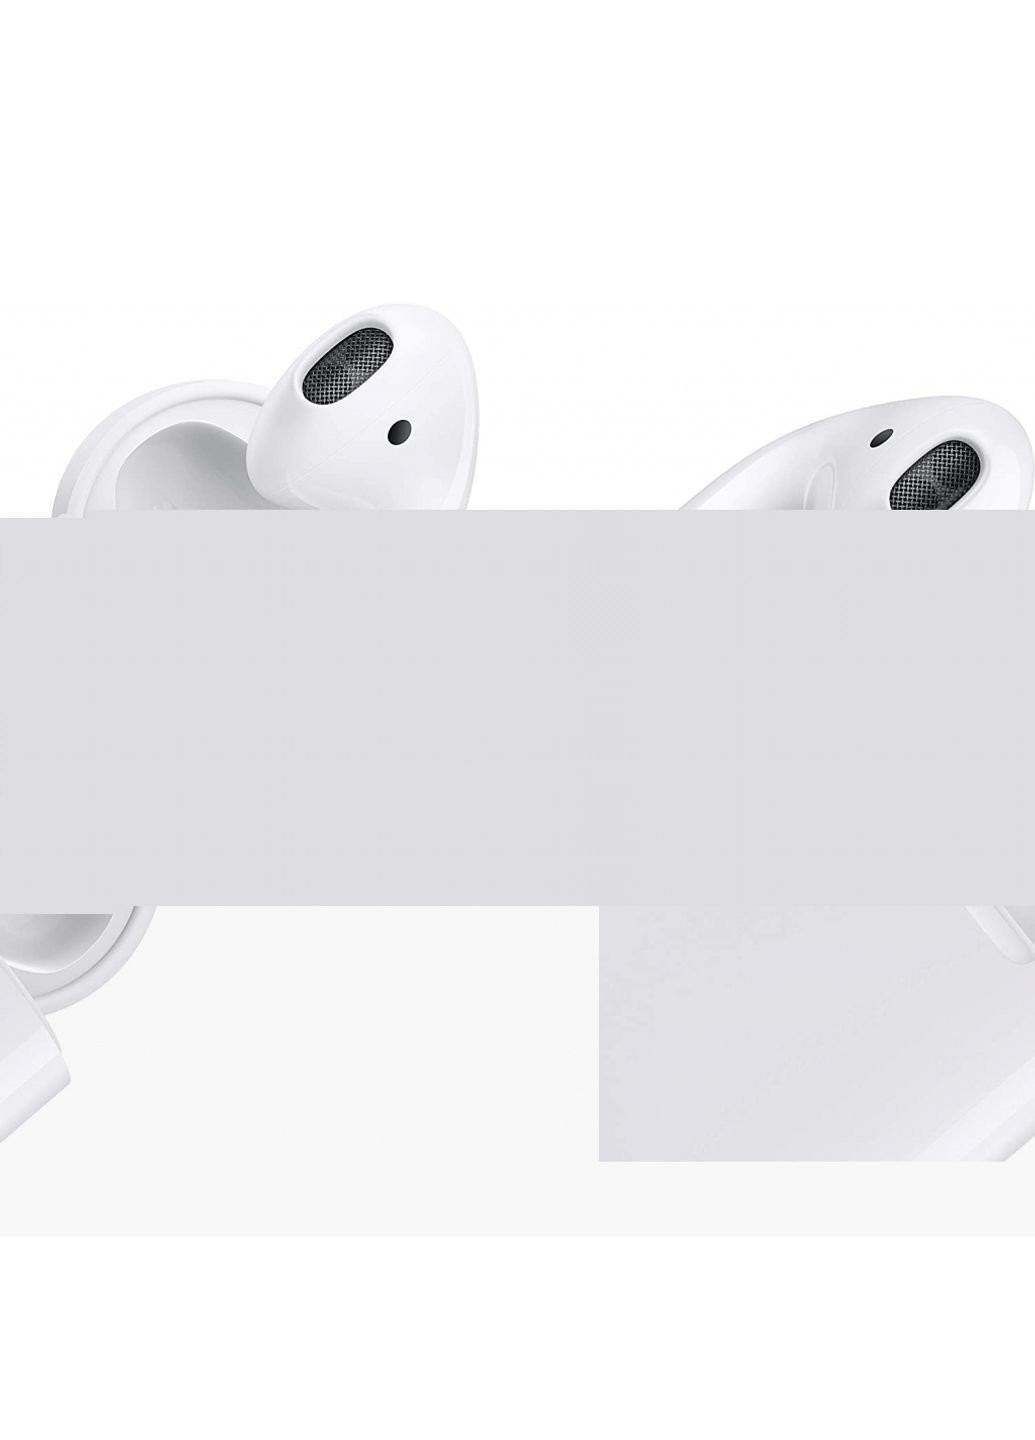 Наушники (MV7N2TY/A) Apple airpods with charging case (253547444)